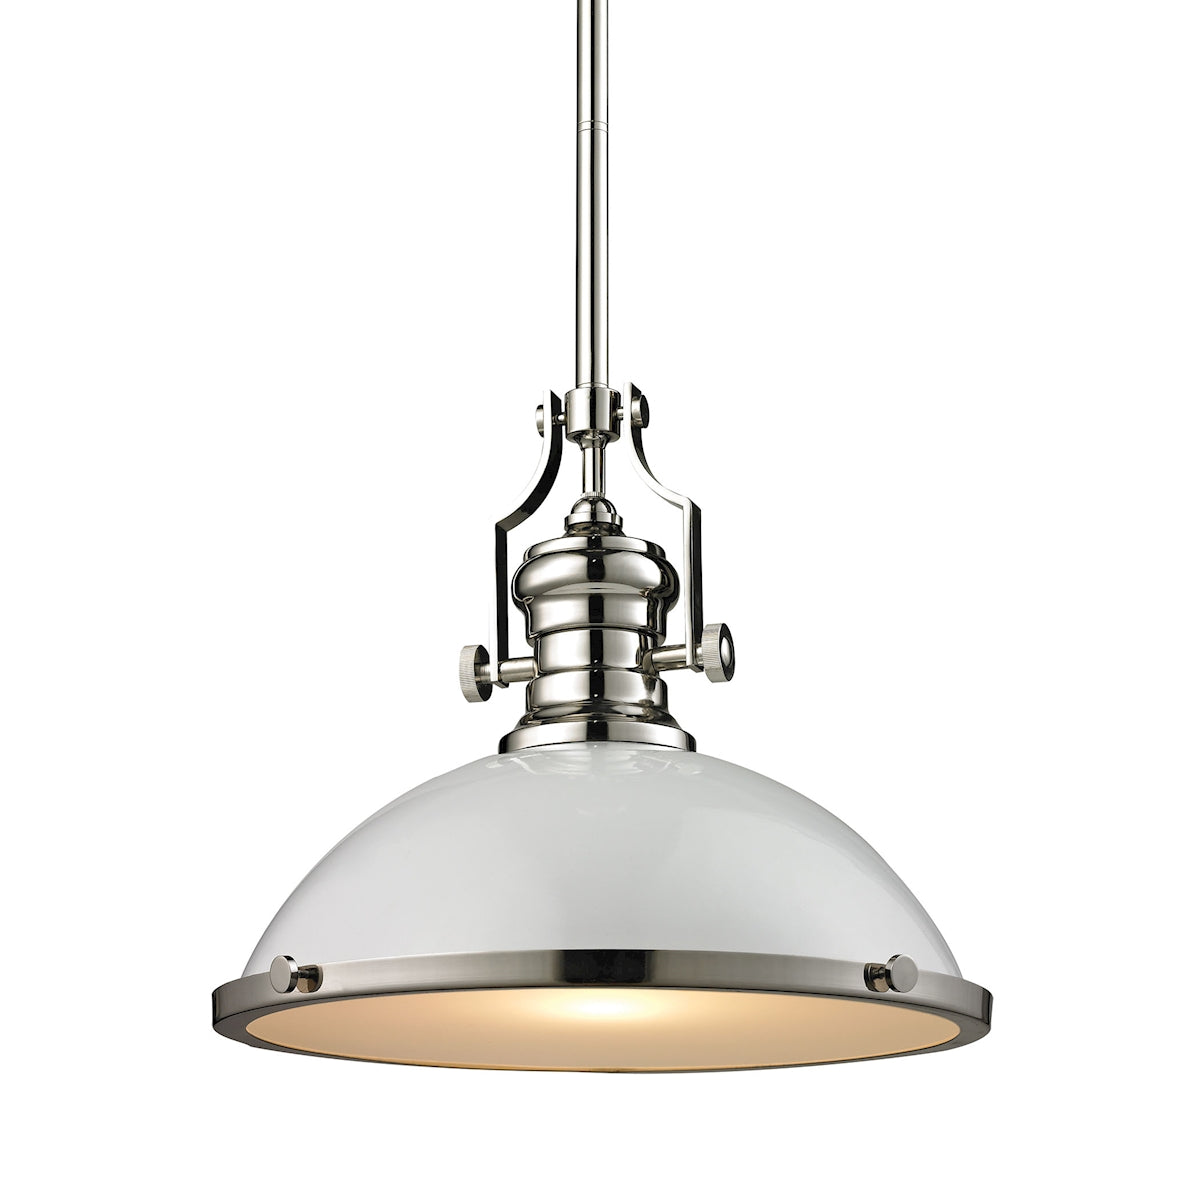 ELK Lighting 66516-1 Chadwick 1-Light Pendant in Polished Nickel with Gloss White Shade